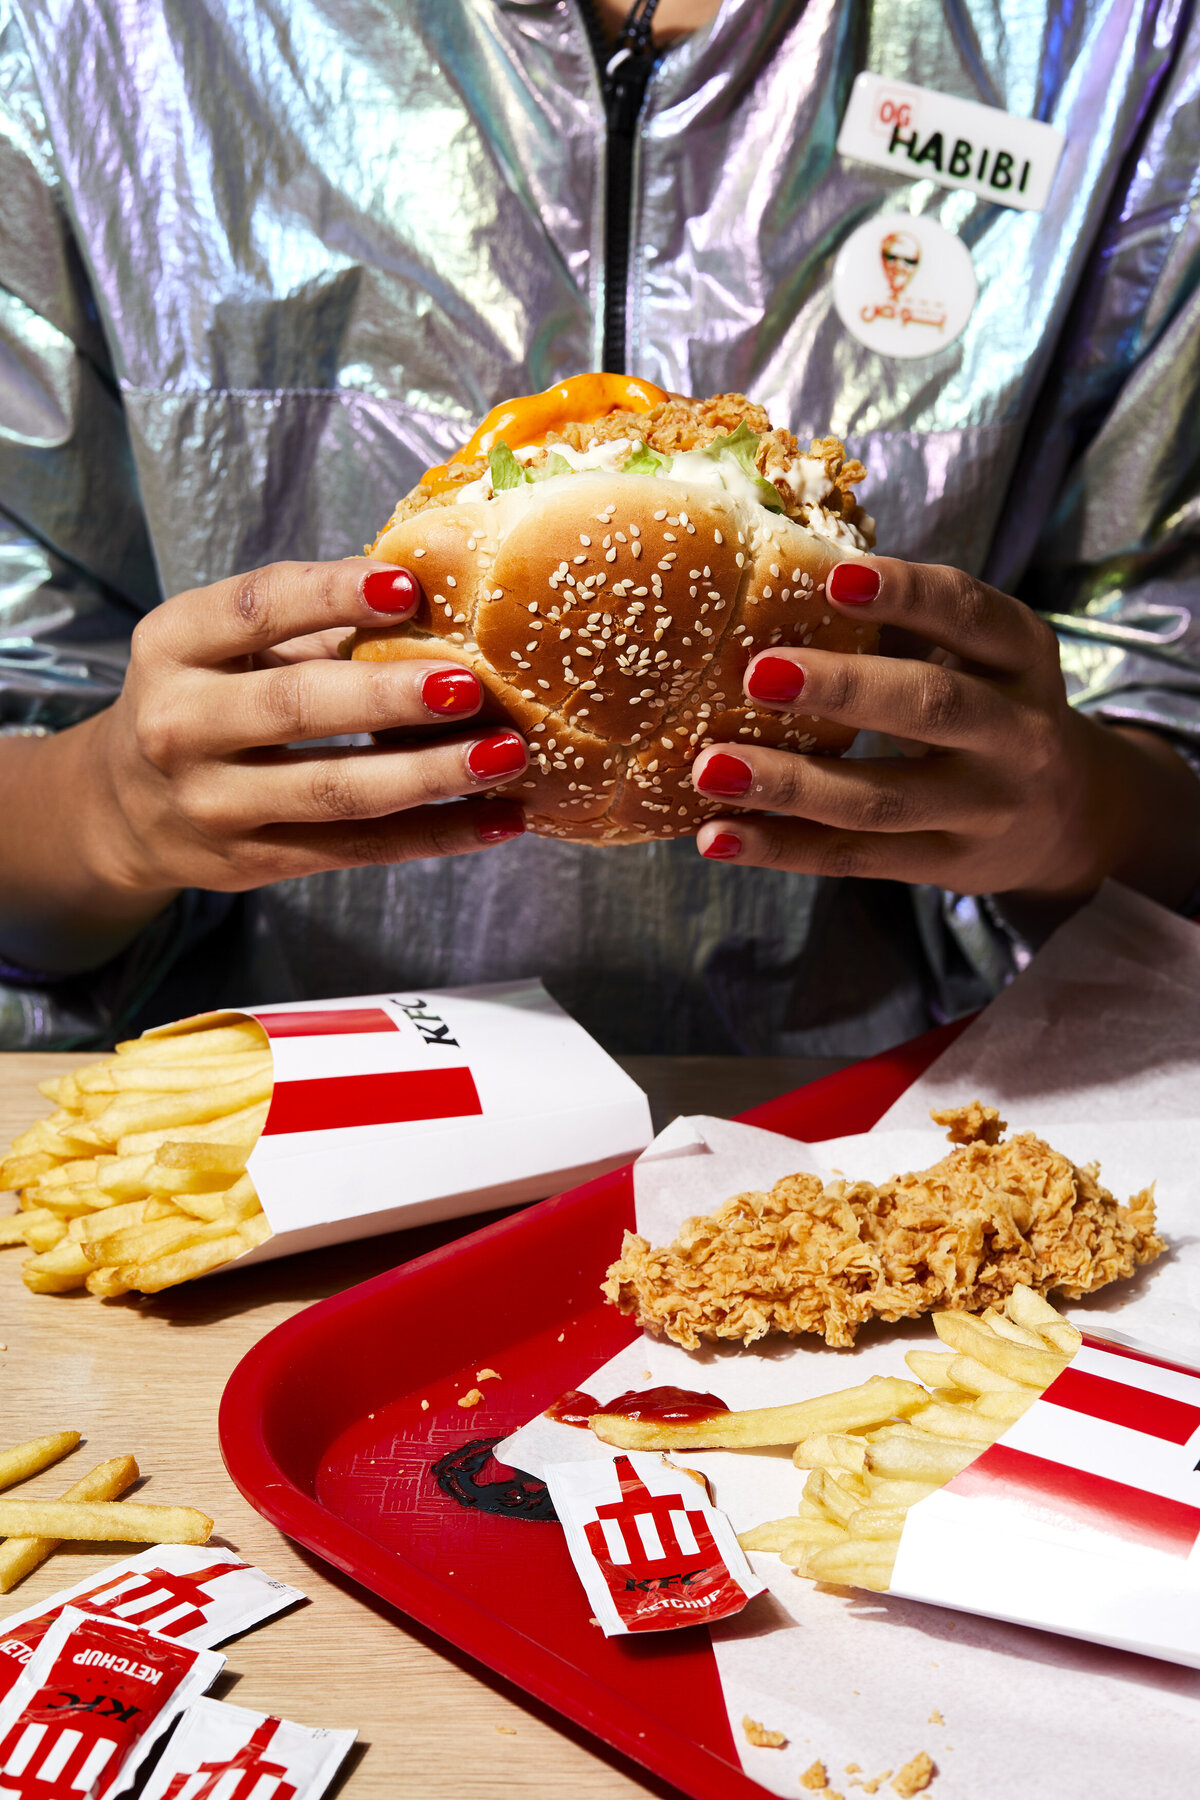 Hands holding a KFC chicken sandwich with fries on the table below them.